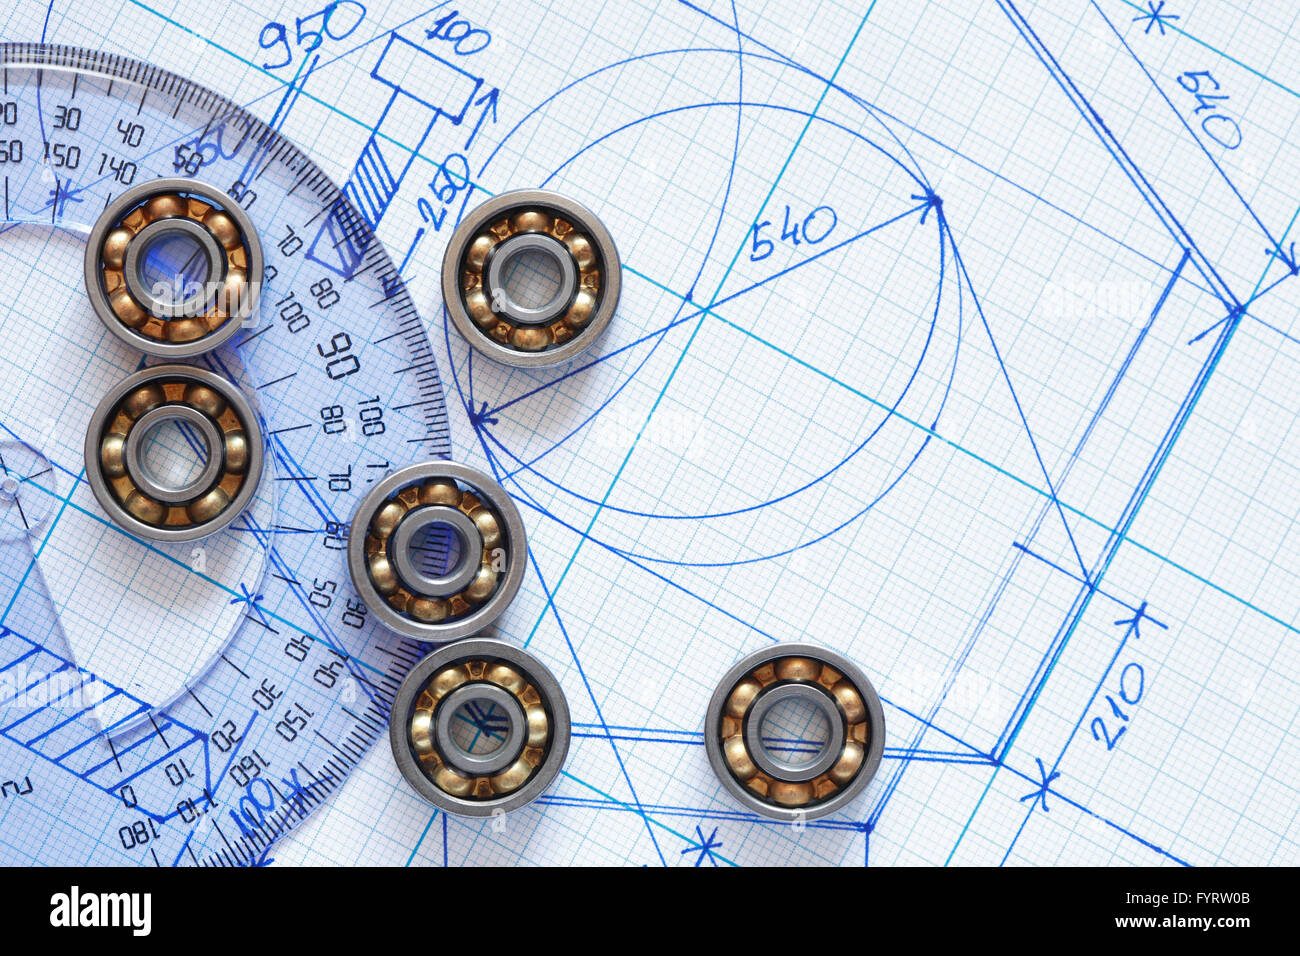 Industrial concept. Few ballbearings near ruler on graph paper background Stock Photo